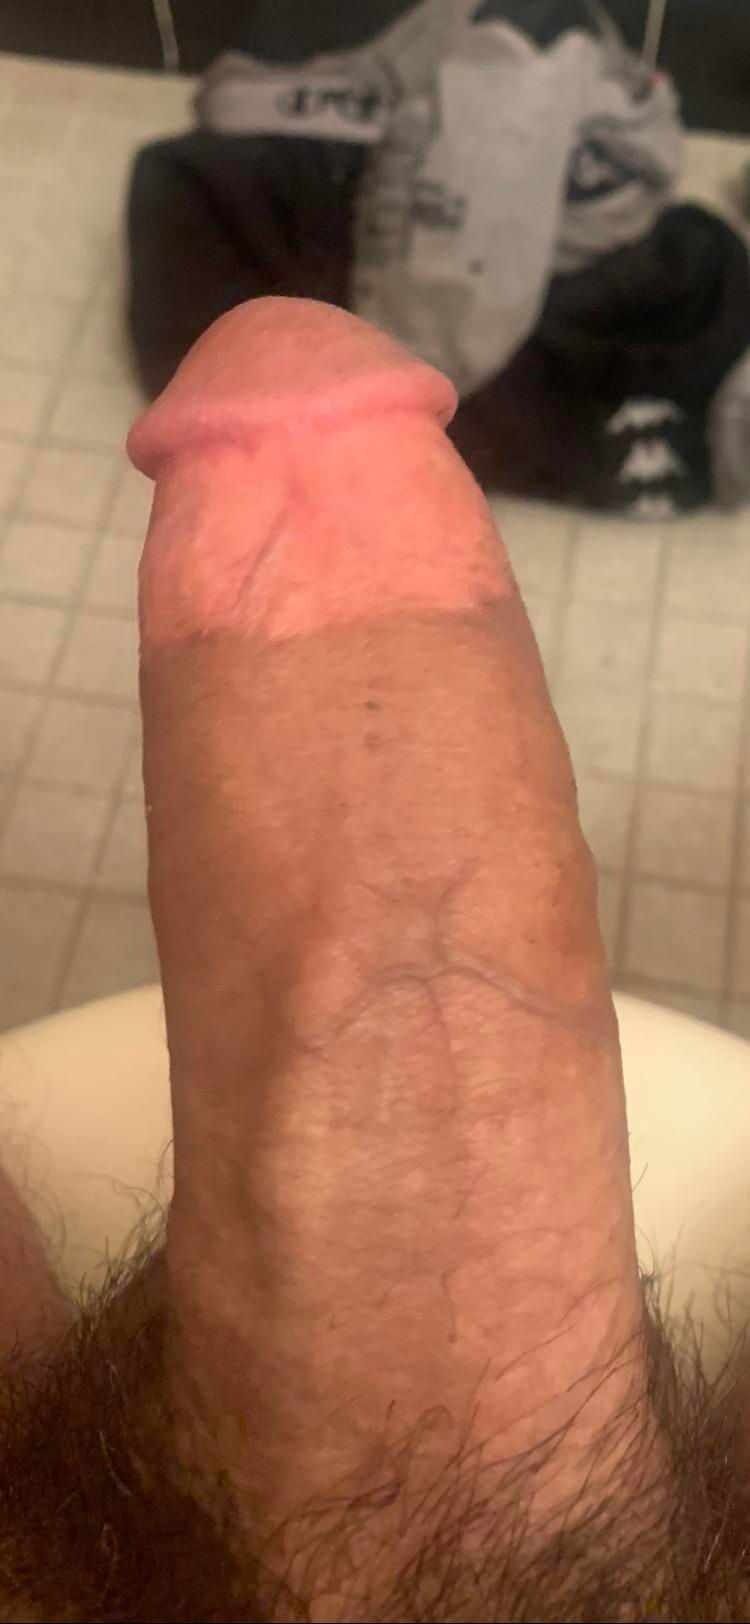 Almost 12 inches of dick!!